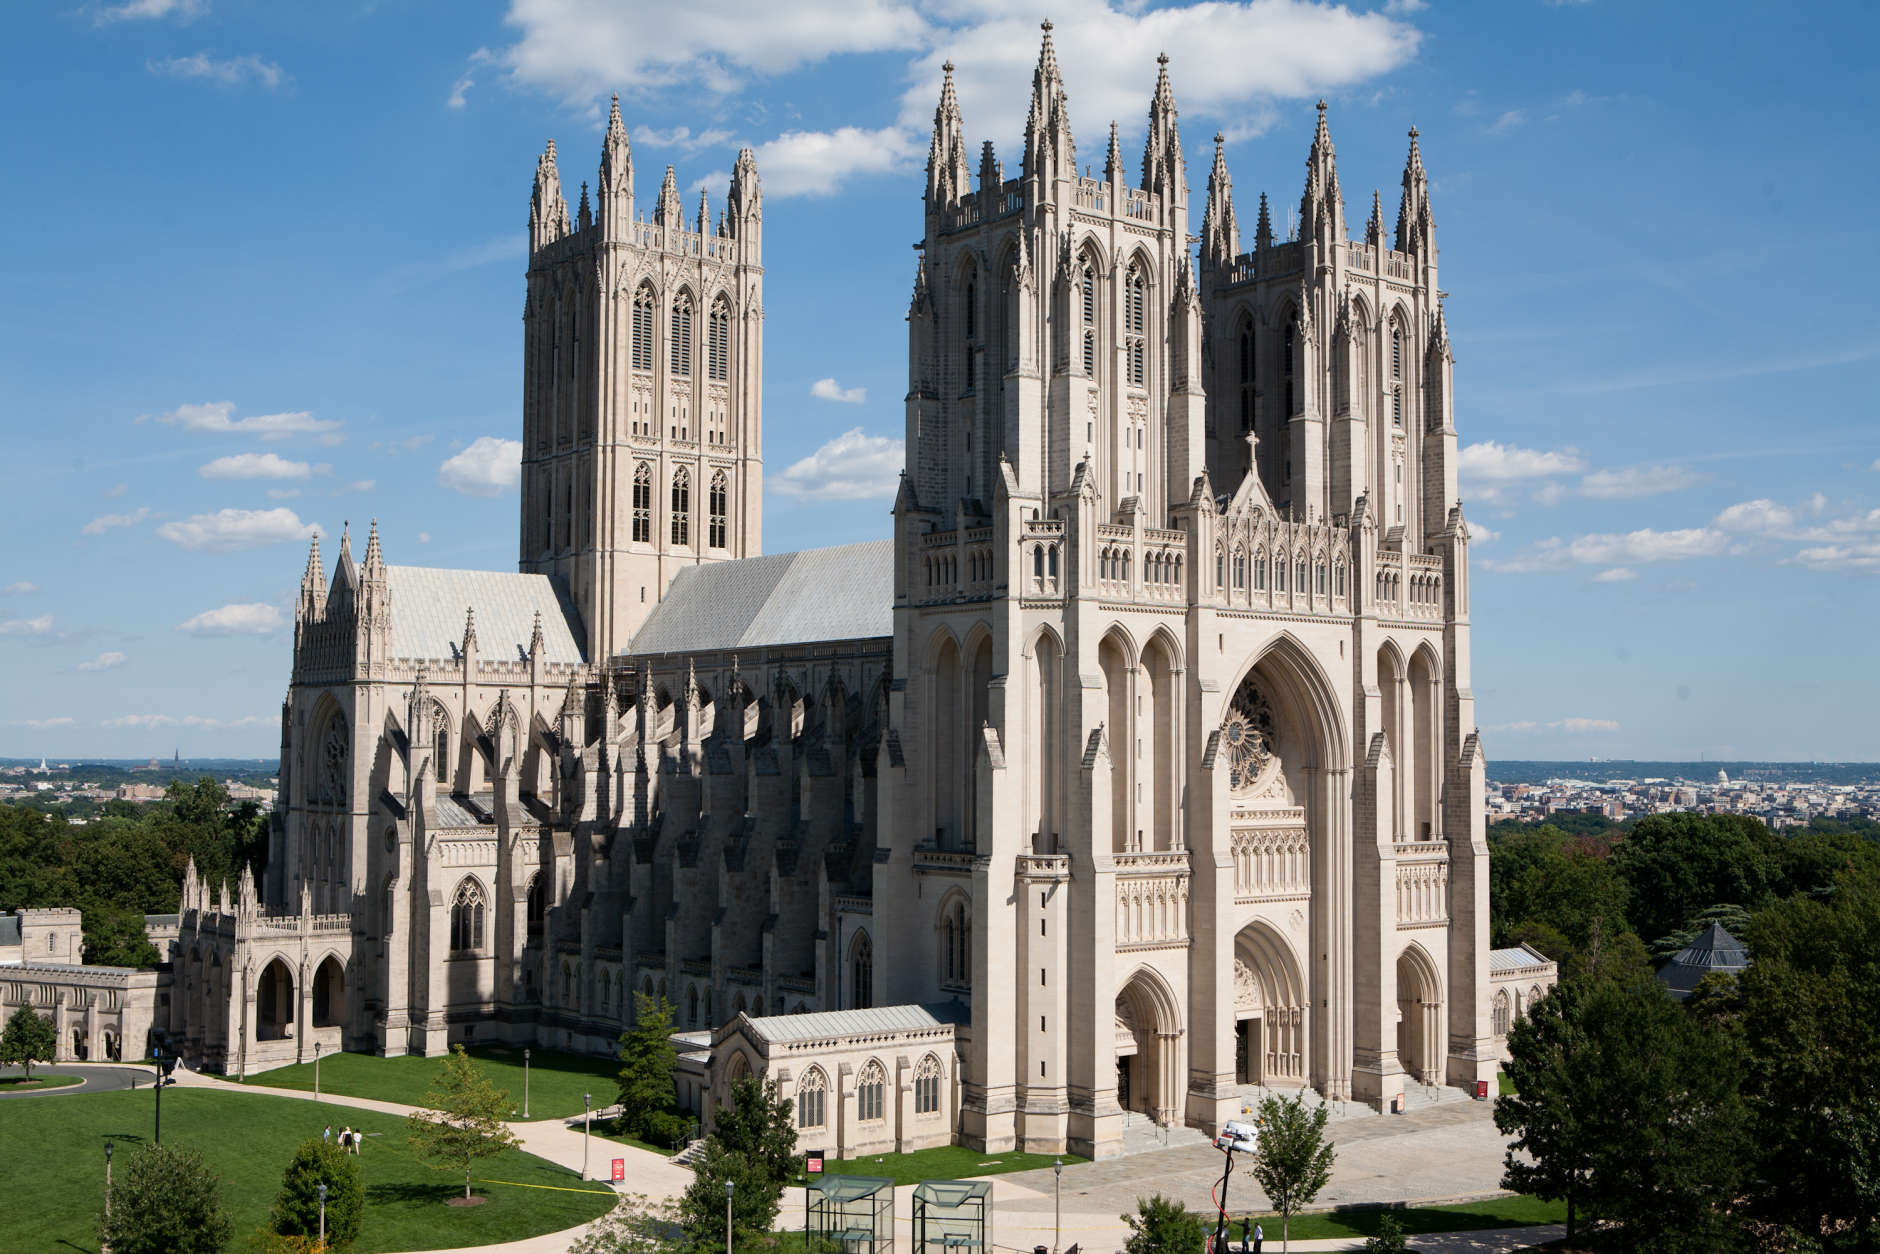 WASHINGTON - AUGUST 23: The Washington National Cathedral is seen on August 23, 2011 in Washington, DC. According to reports the church suffered minor damage to several spires. The epicenter of the 5.8 earthquake was located in near Louisa in central Virginia.  (Photo by Brendan Hoffman/Getty Images)